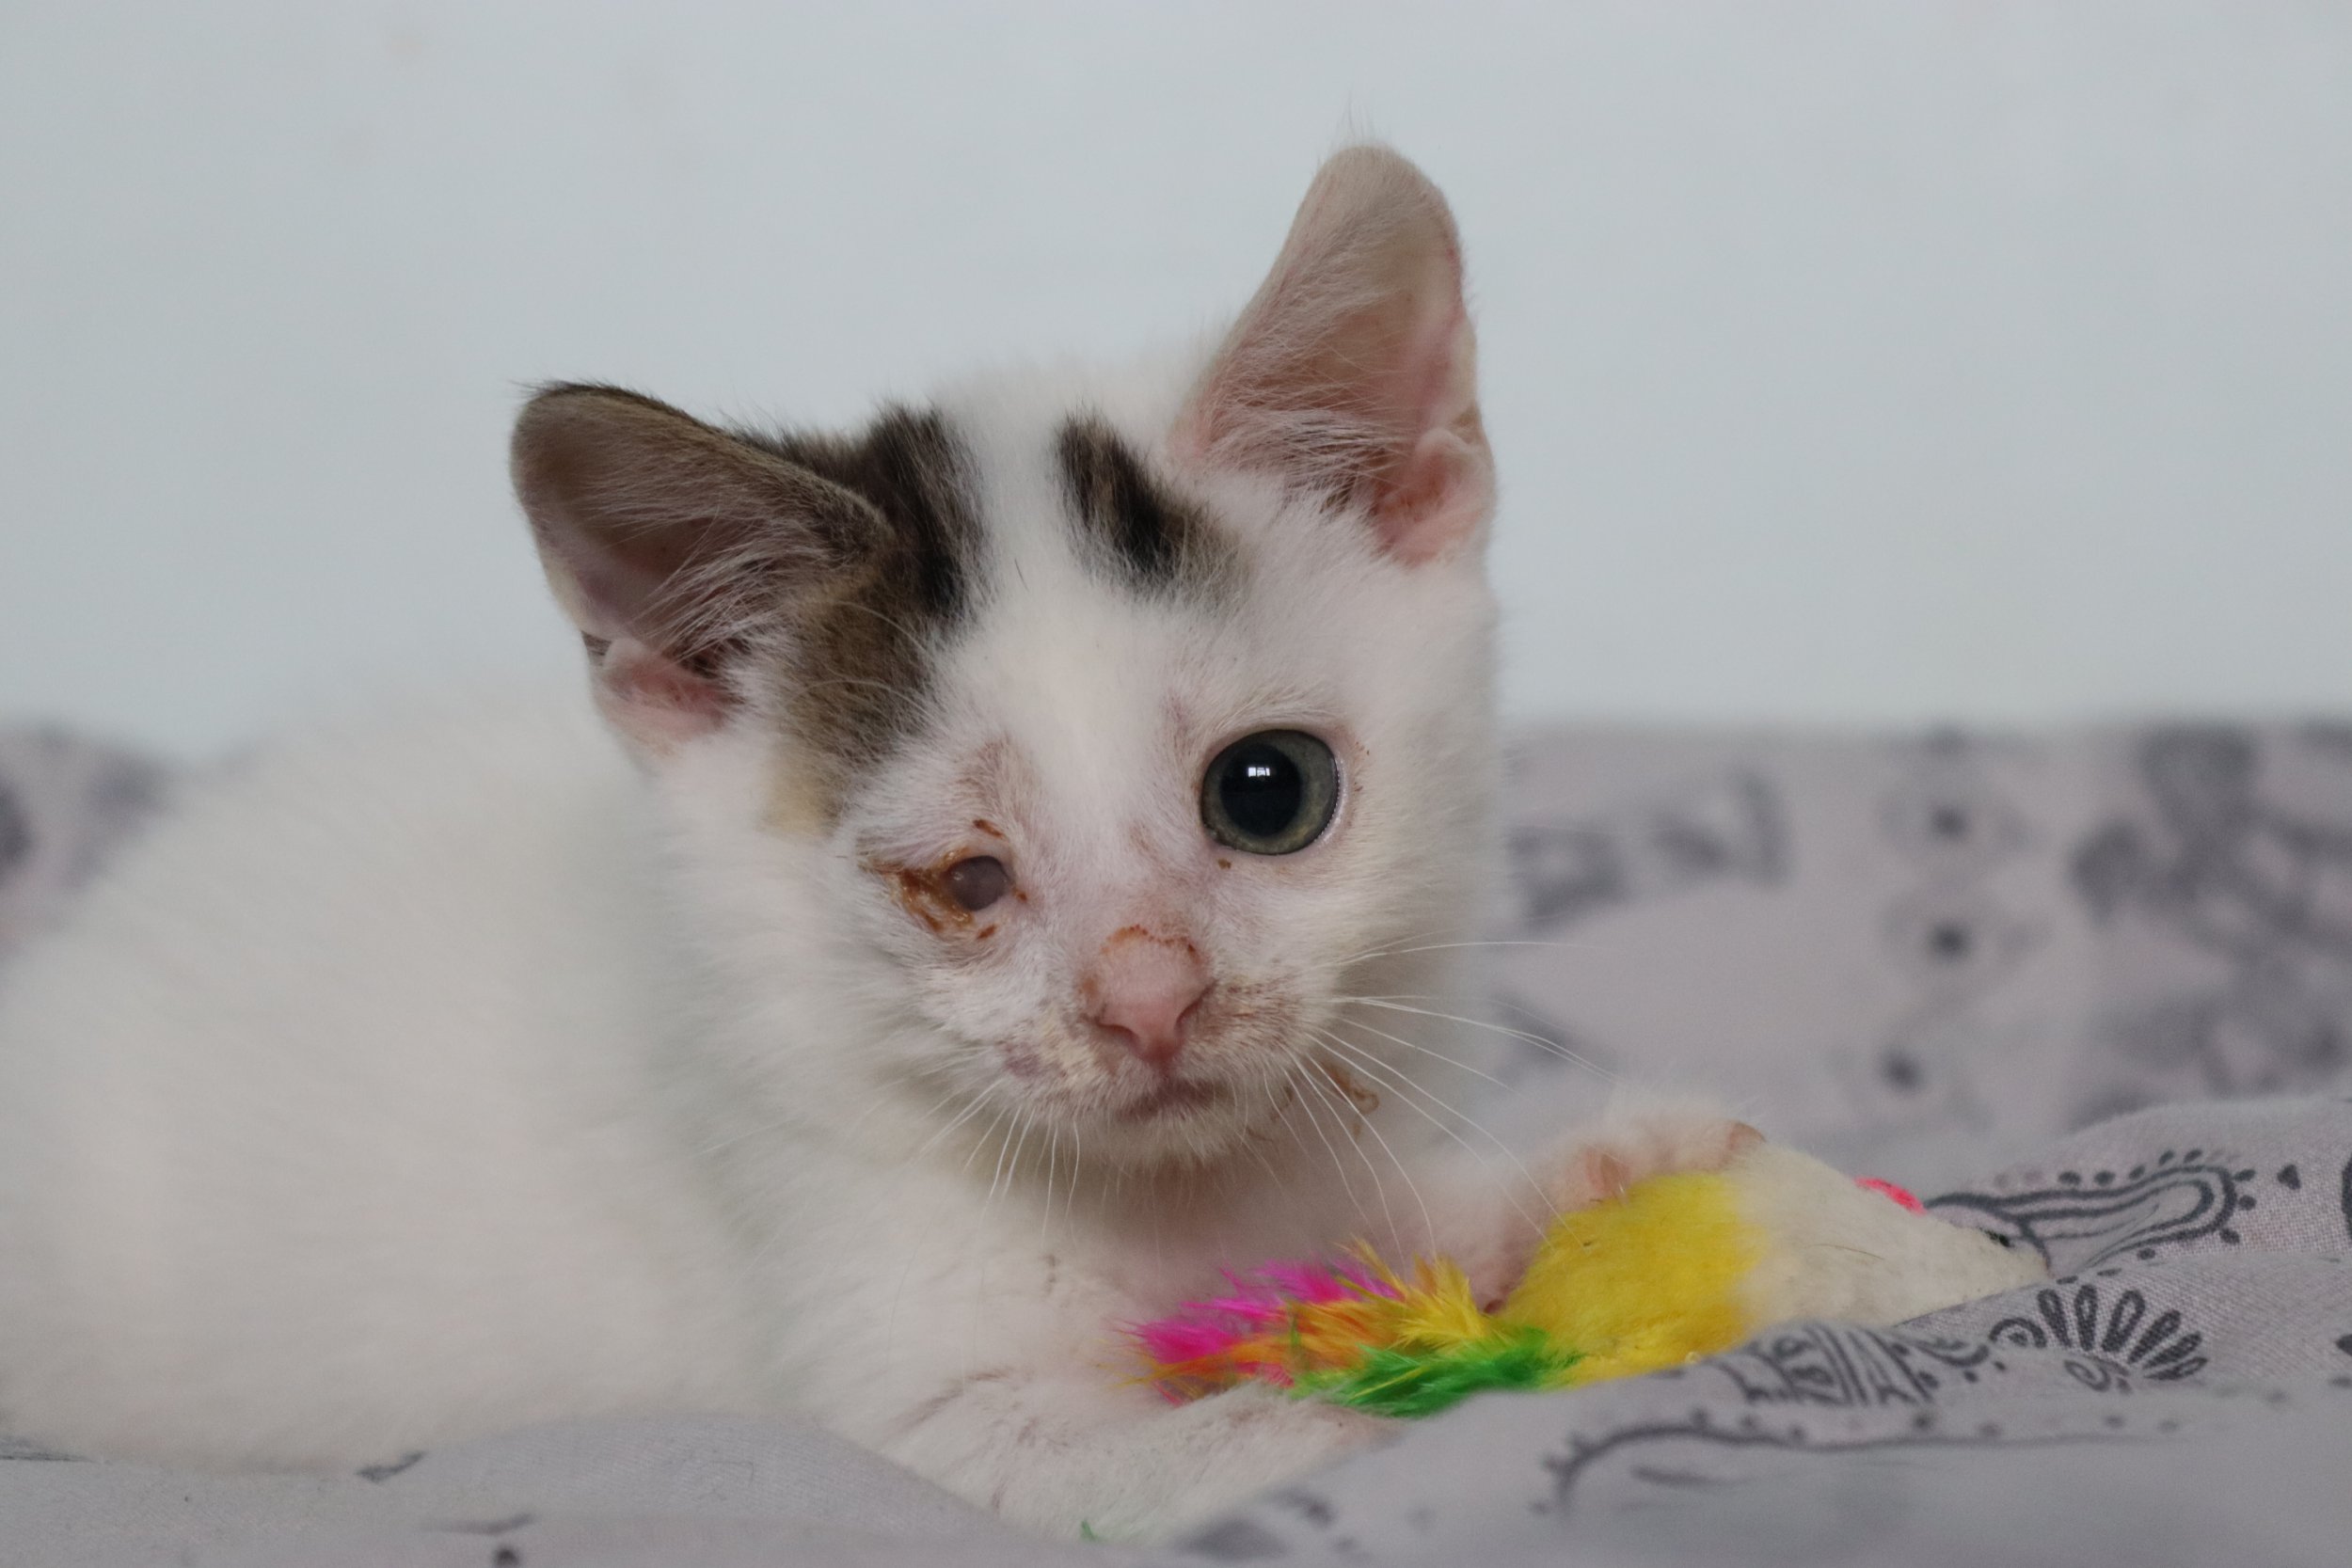 a Kitten found in a scrapyard who's found a new home in time for Christmas